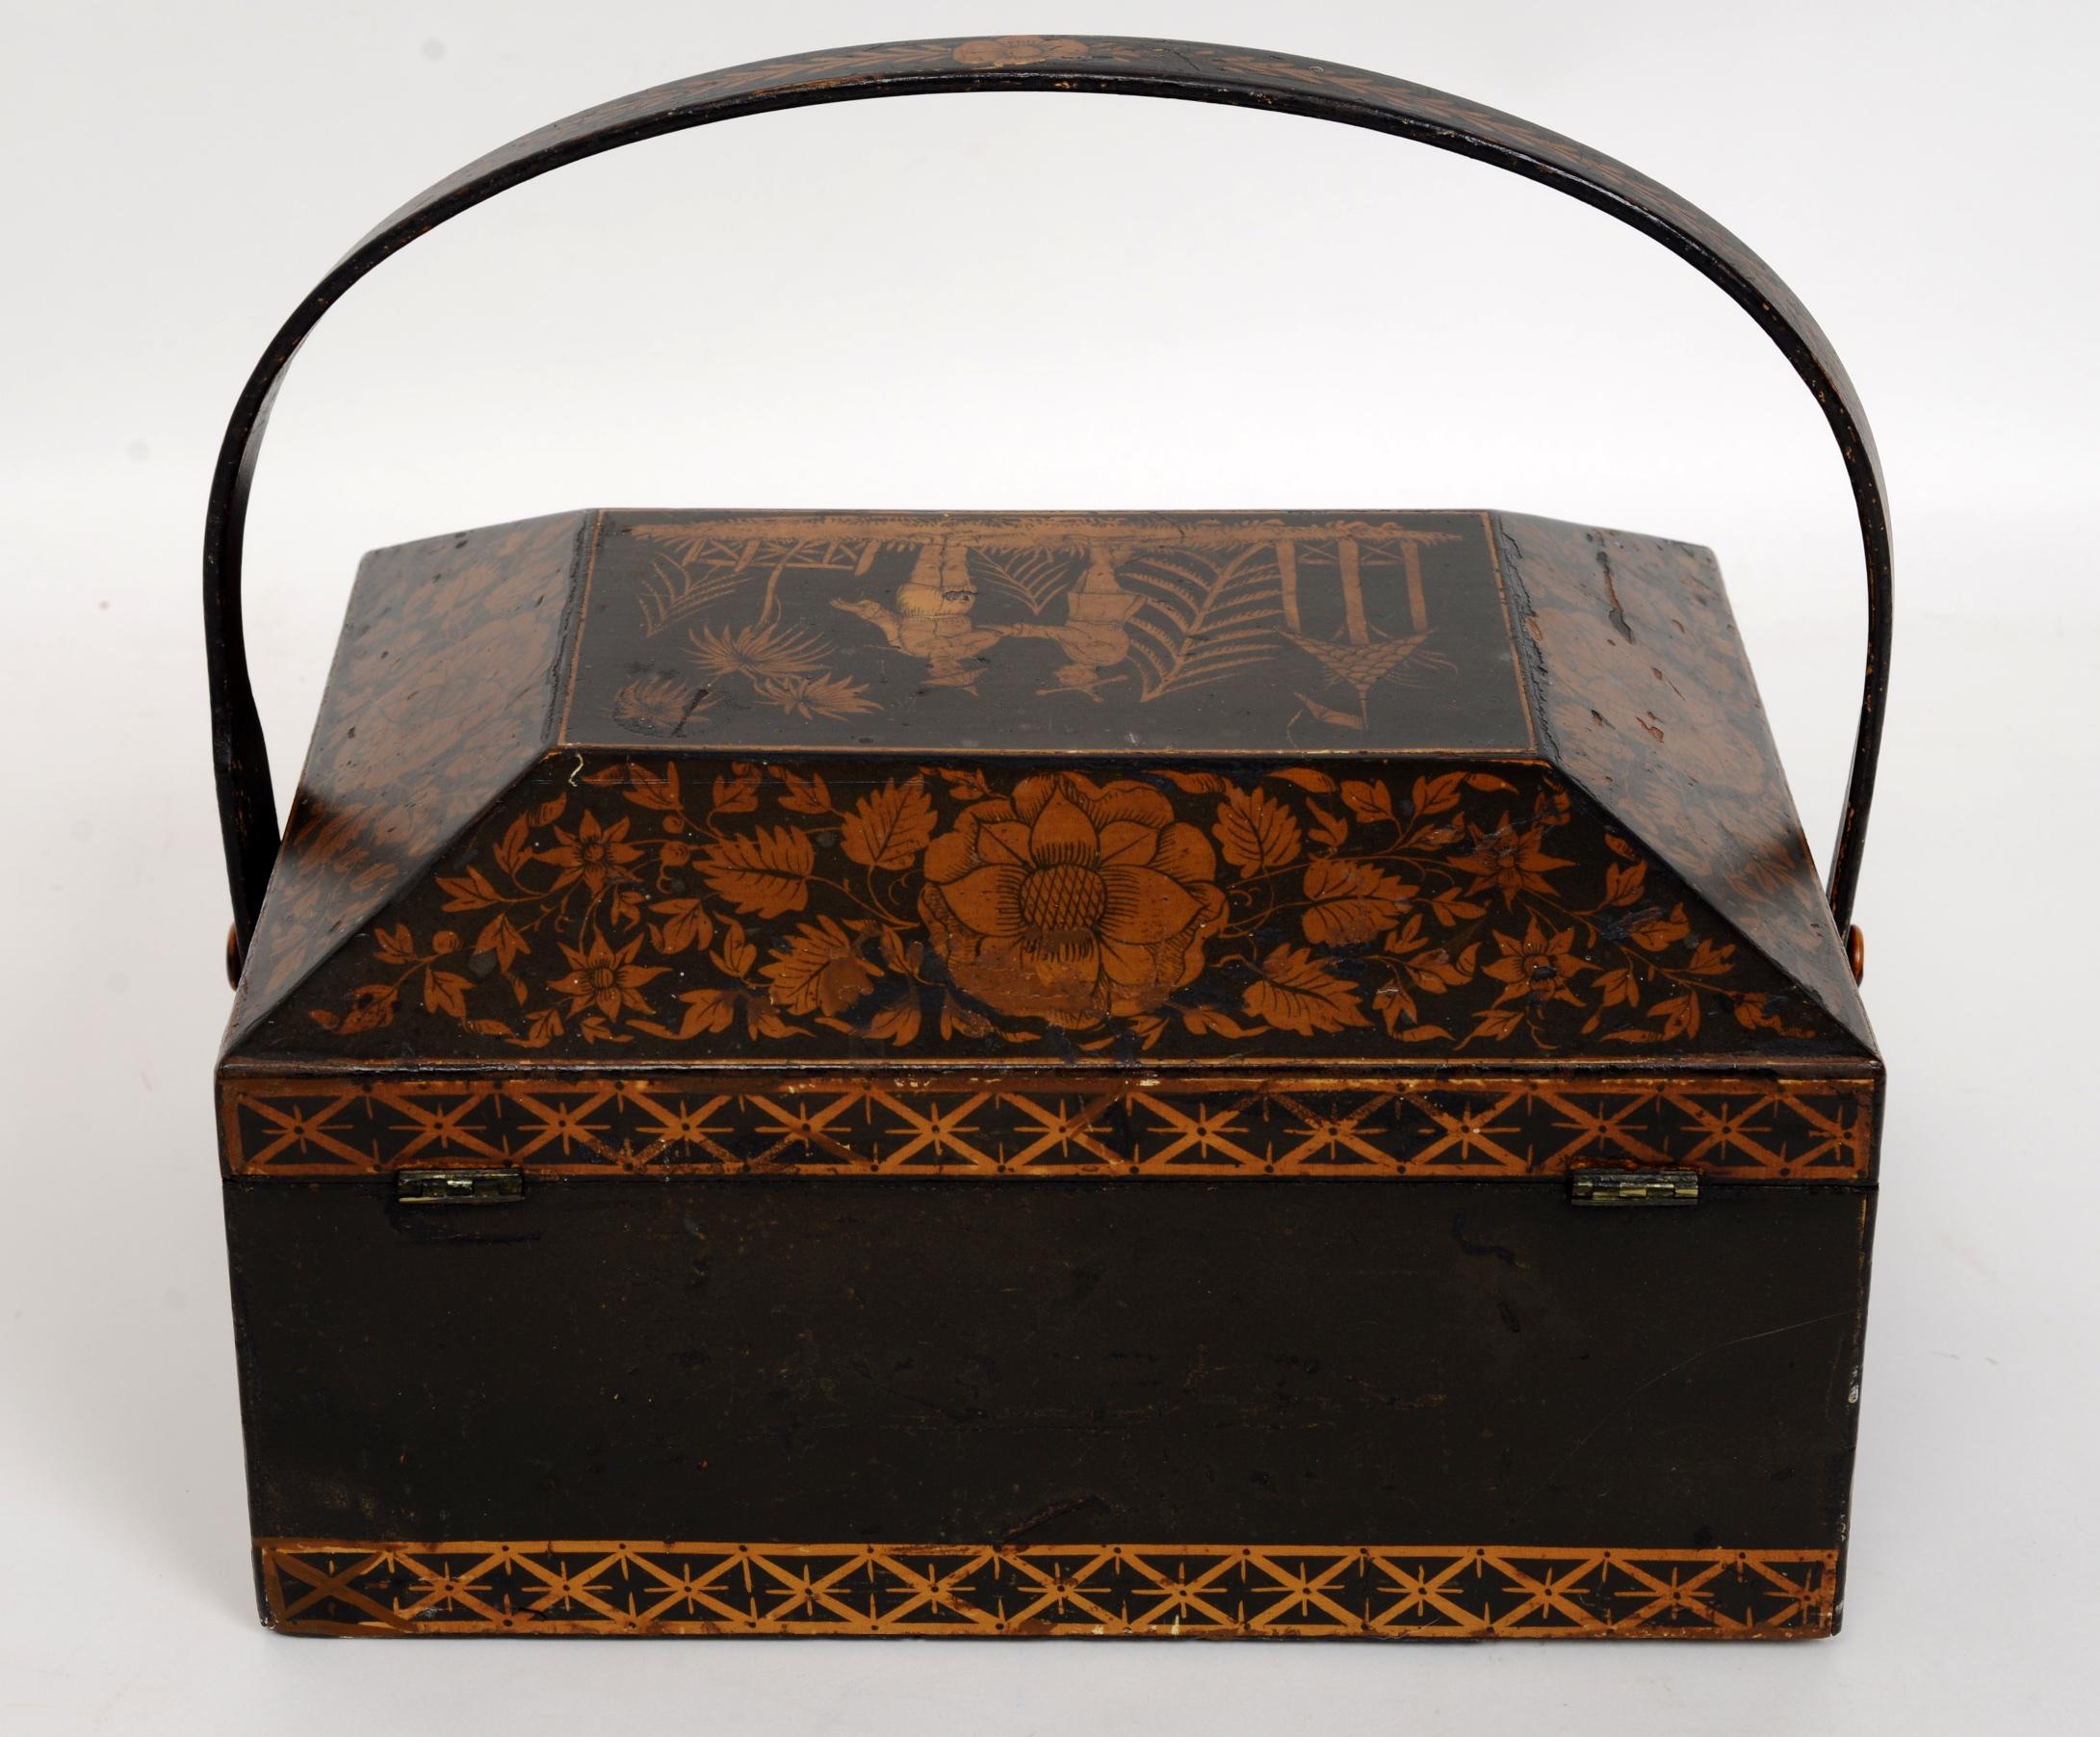 Painted Regency Chinoiserie Decorated Penwork Box with Swing Handle, circa 1810